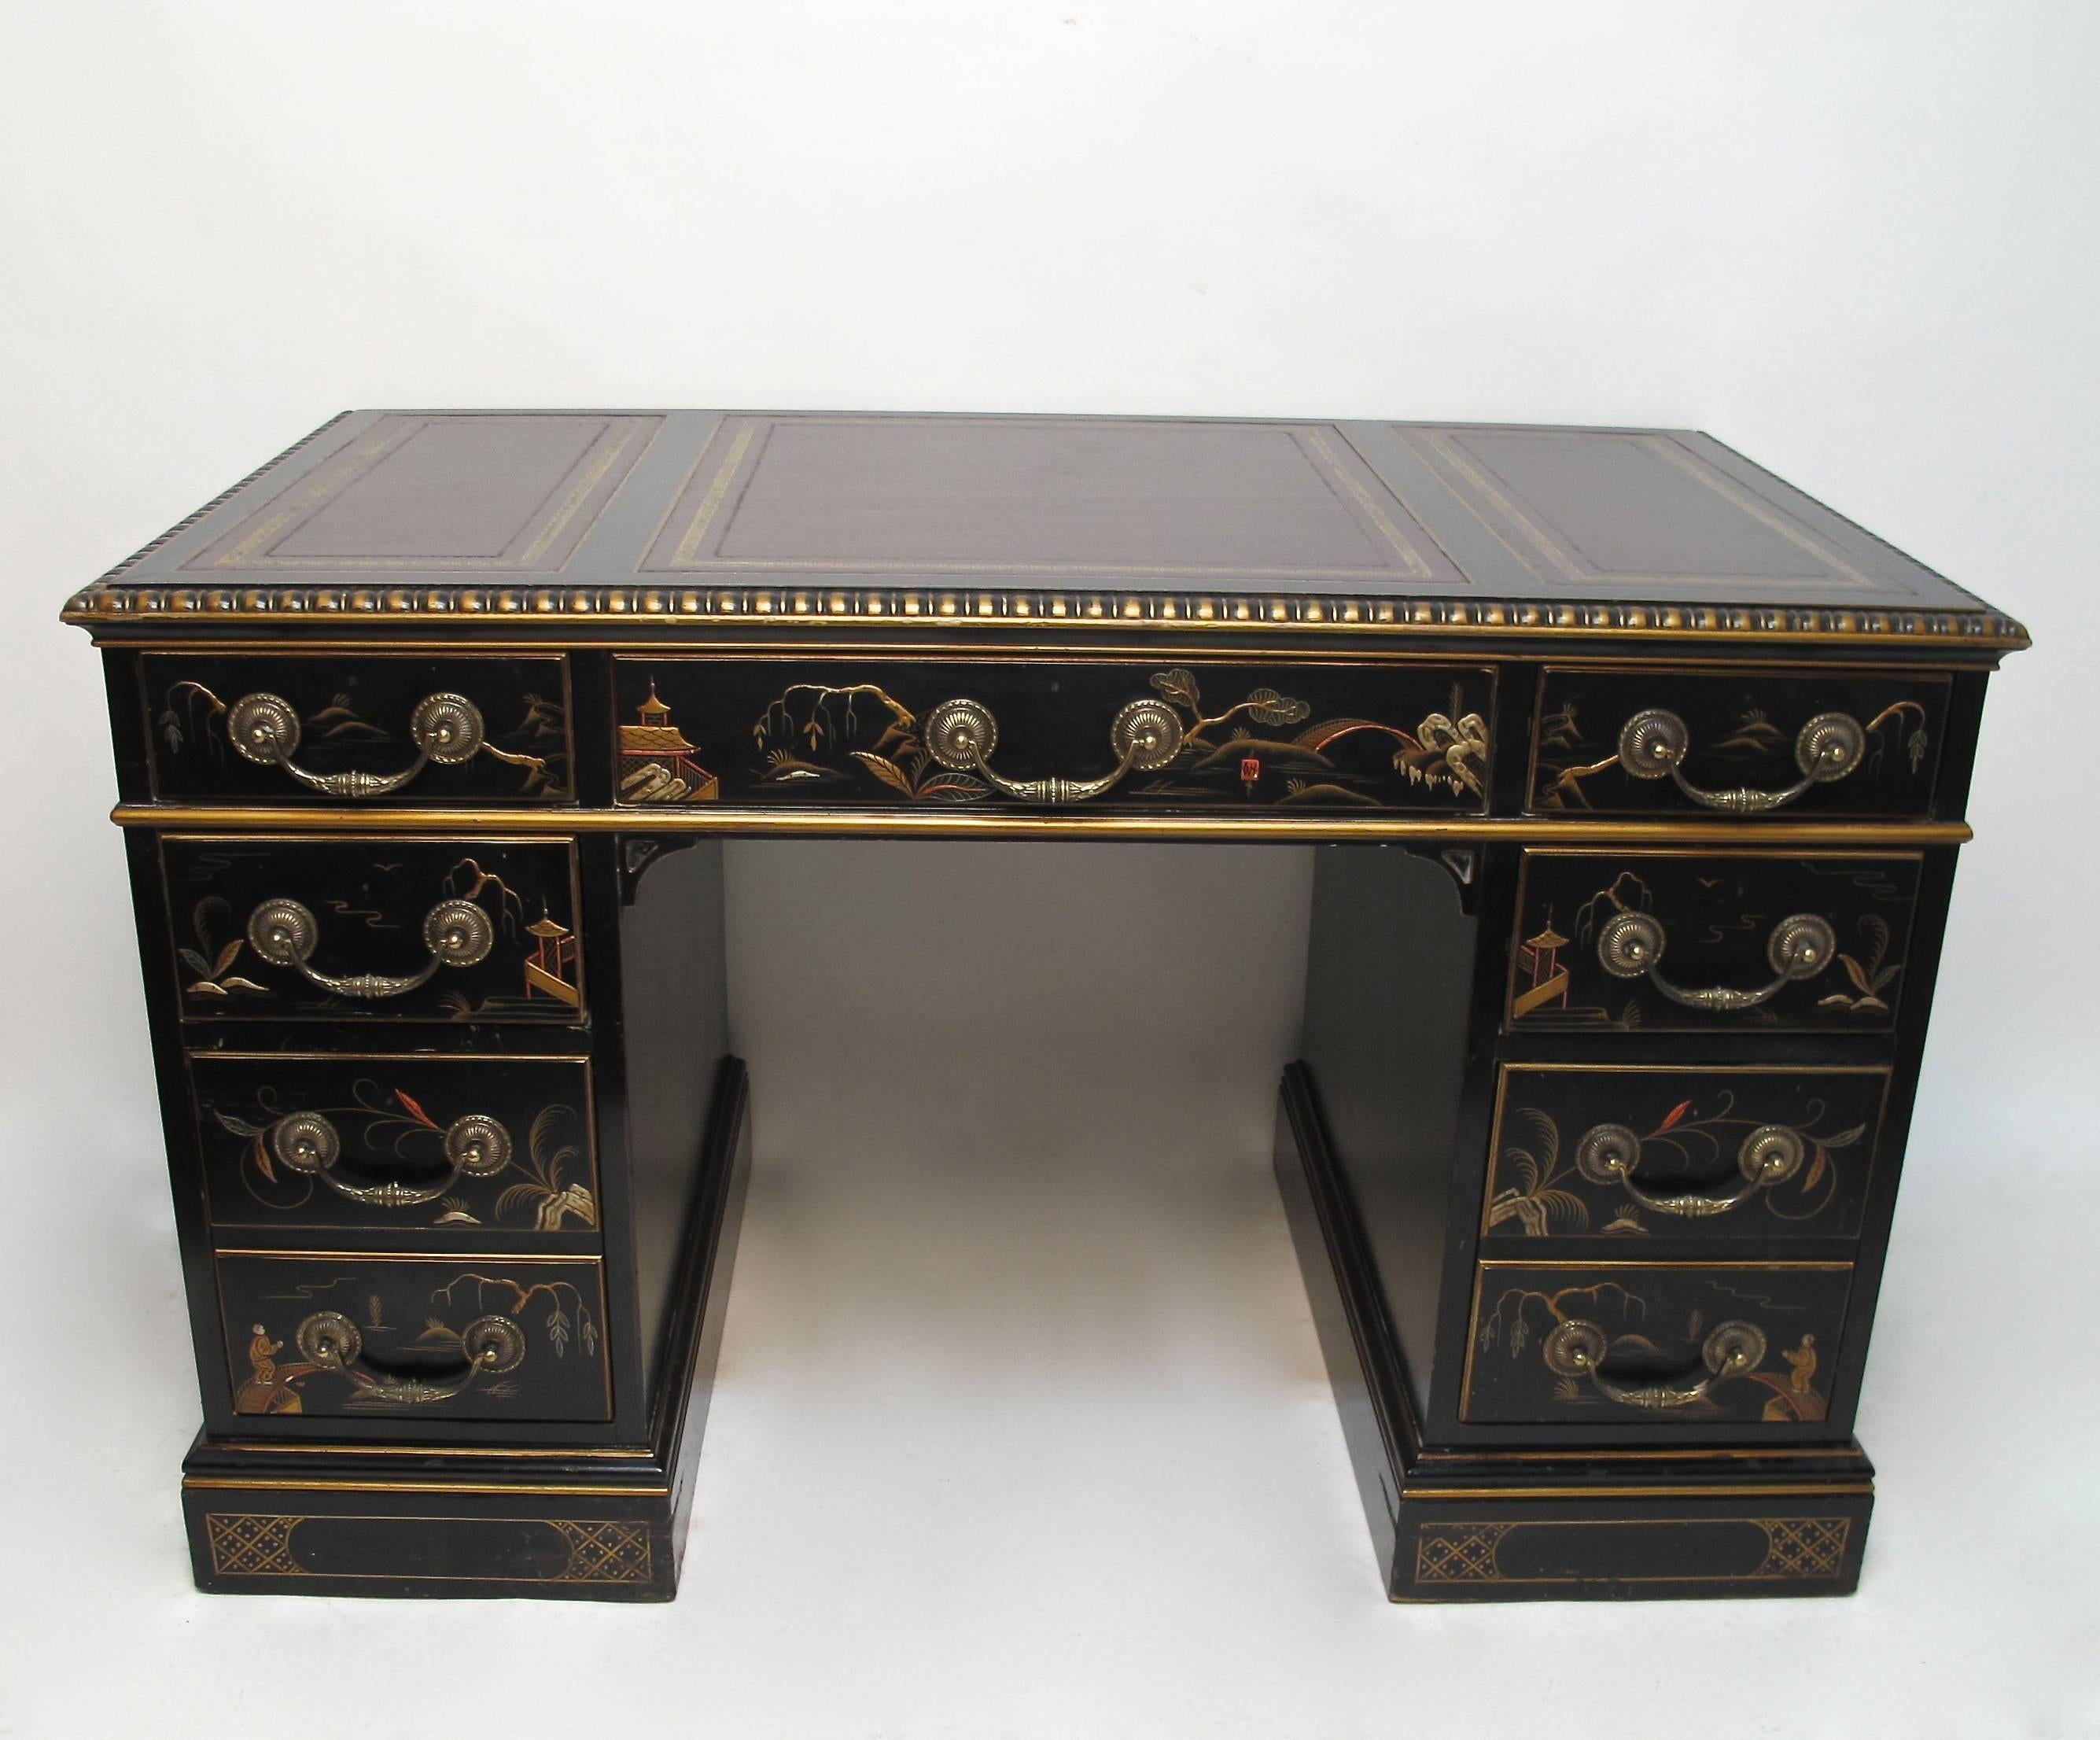 Chinoiserie Decorated Double Pedestal Desk with Gilt Tooled Red Leather Top.  Black ground hand painted with figures, flowers and garden scenes.  The top with three inset red leather panels each with gold tooling.  Each pedestal with with two short